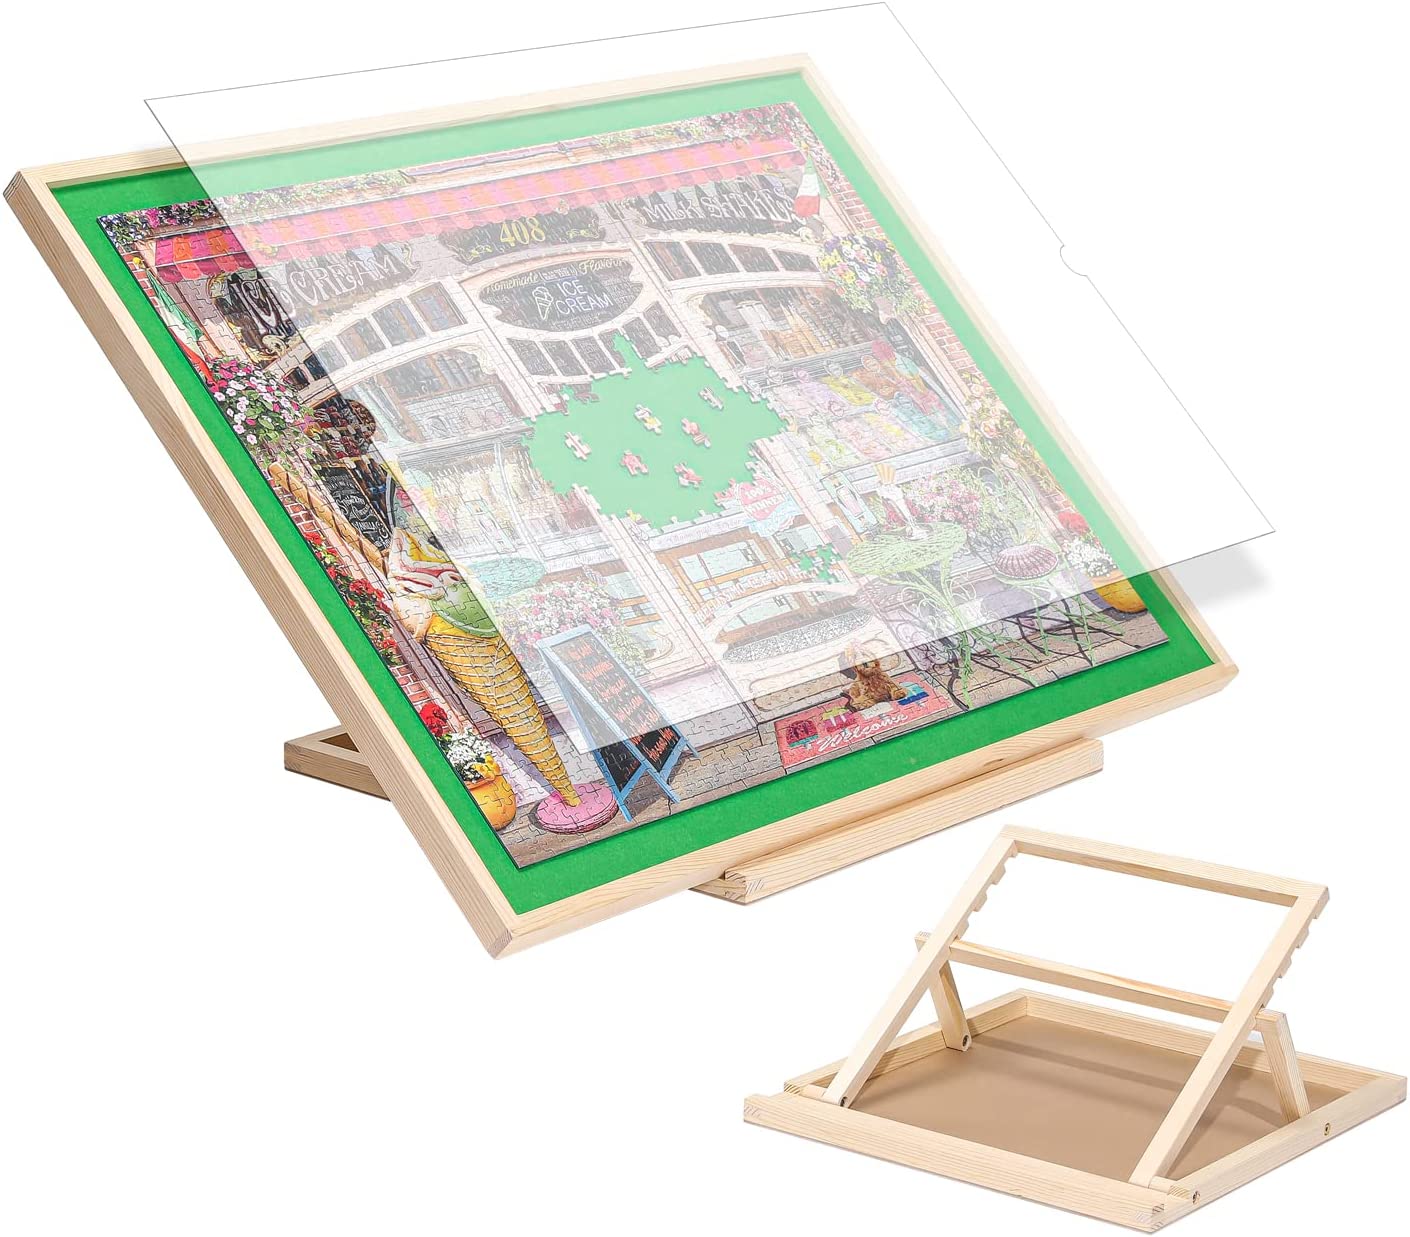 Portable Jigsaw Puzzle Table - 1500 Pcs Puzzle Easel with Stand and Cover, Non-Slip Felt Puzzle Tables for Adults